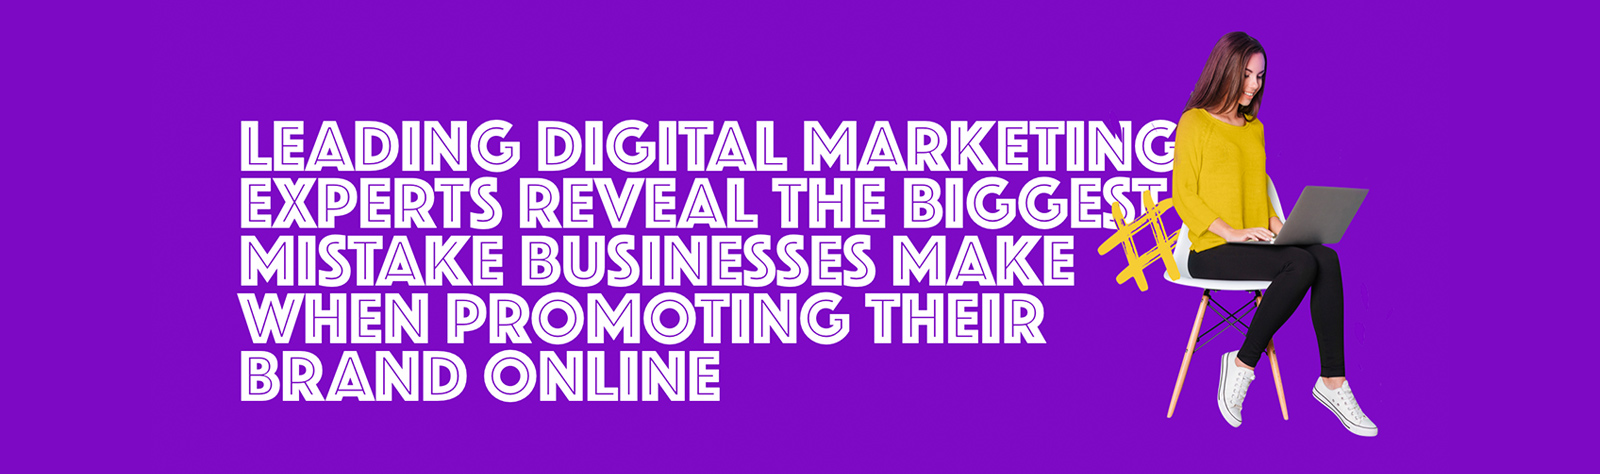 Leading Digital Marketing experts reveal the biggest mistake businesses make when promoting their brand online